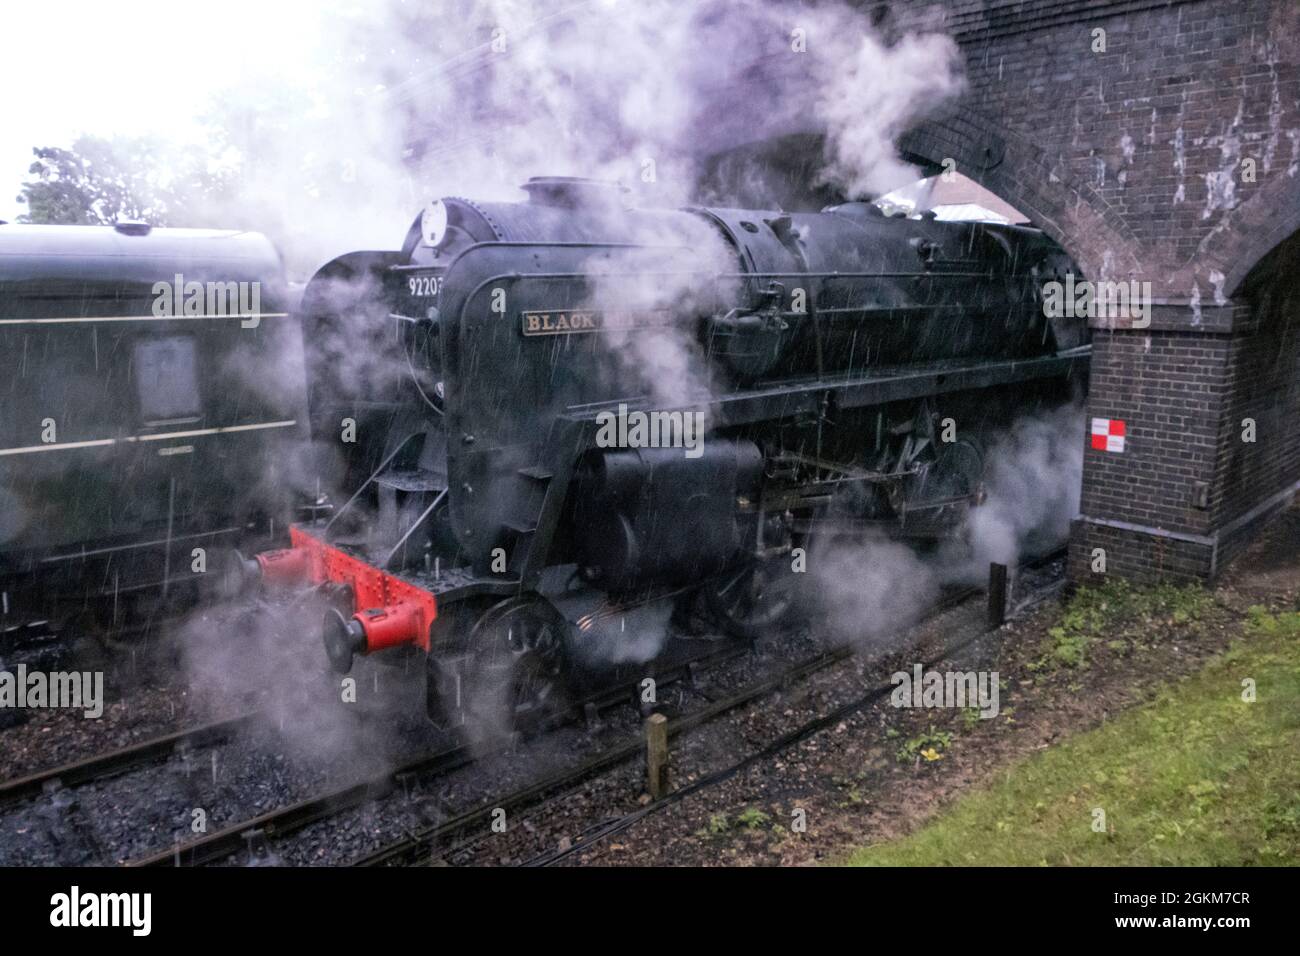 Black Prince 92203 BR 9F steam locomotive pulling a passenger train into Weybourne Station on the North Norfolk Railway Stock Photo